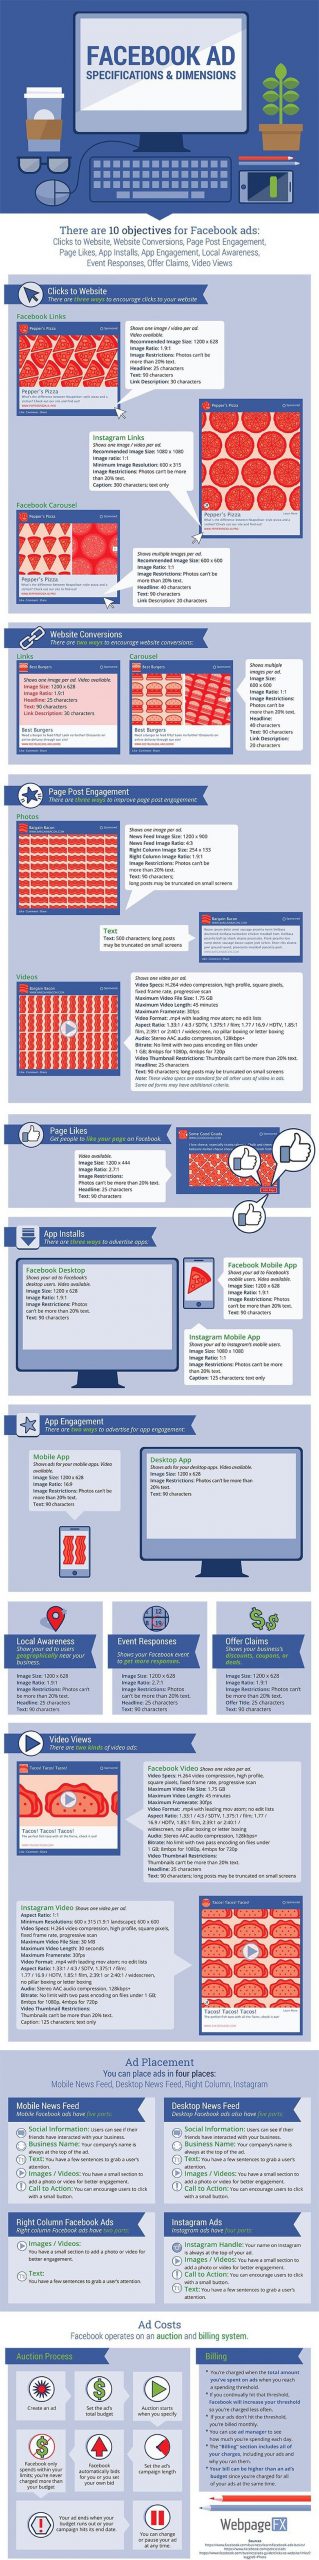 a beginners guide to a successful facebook advertising campaign infographic scaled 1